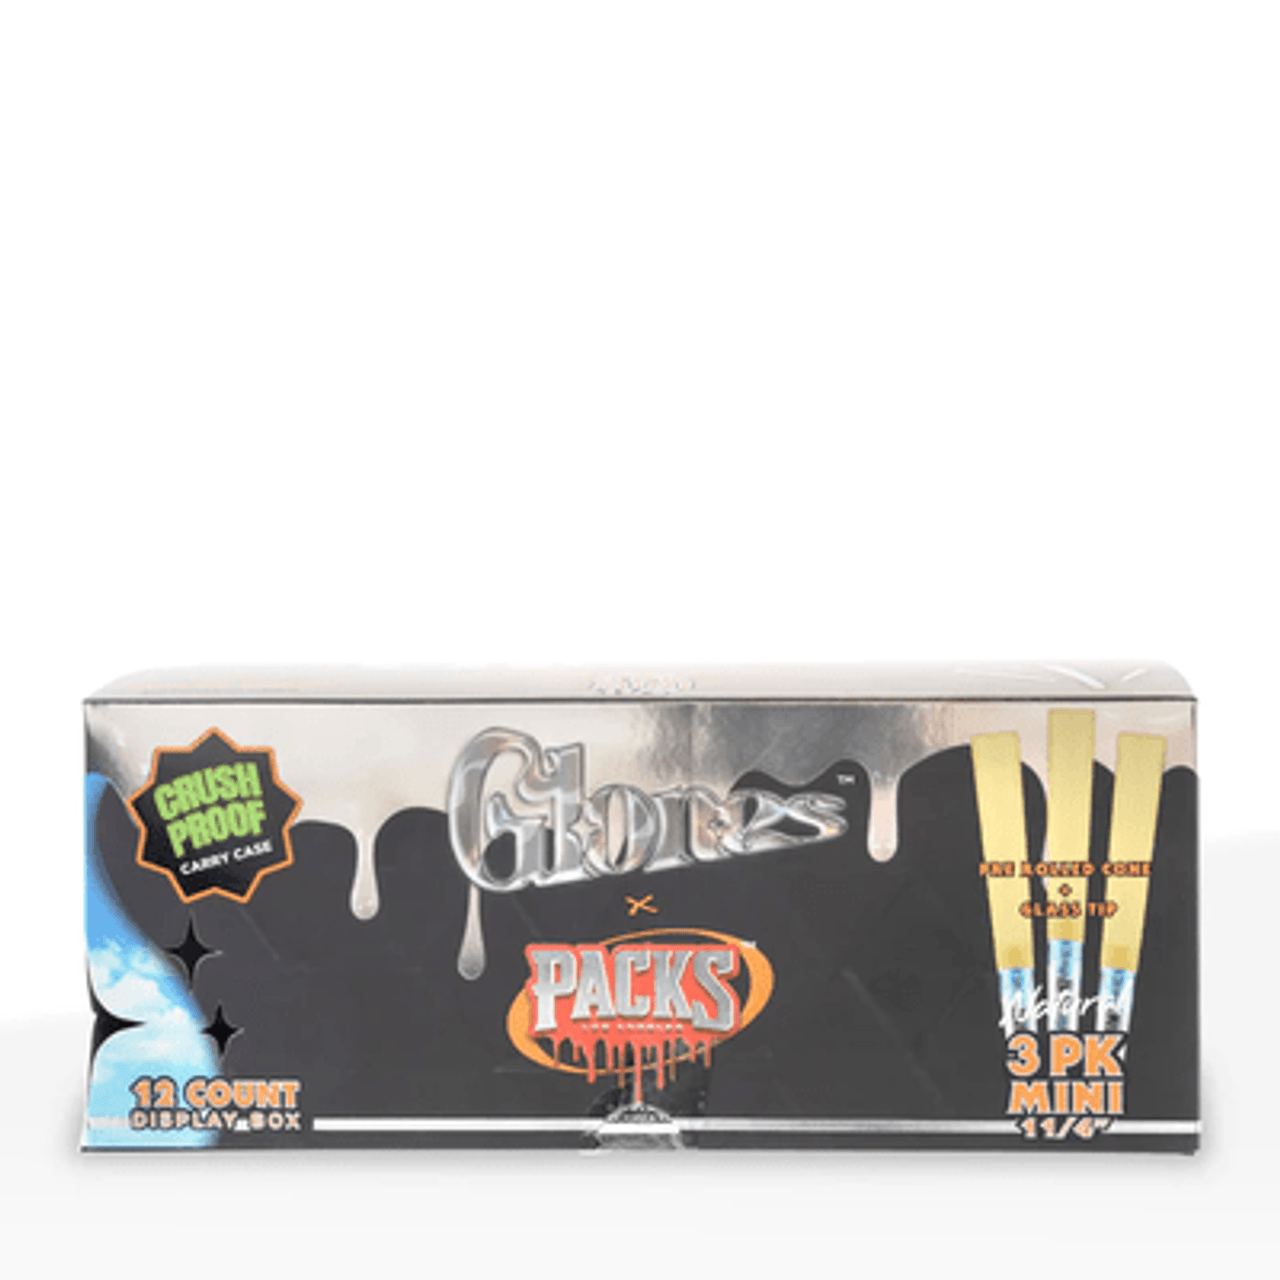 GLONES Unbleached Pre-Rolled GLASS Cones 1 1/4 Size | 12 packs of 3 Cones | Retail Display